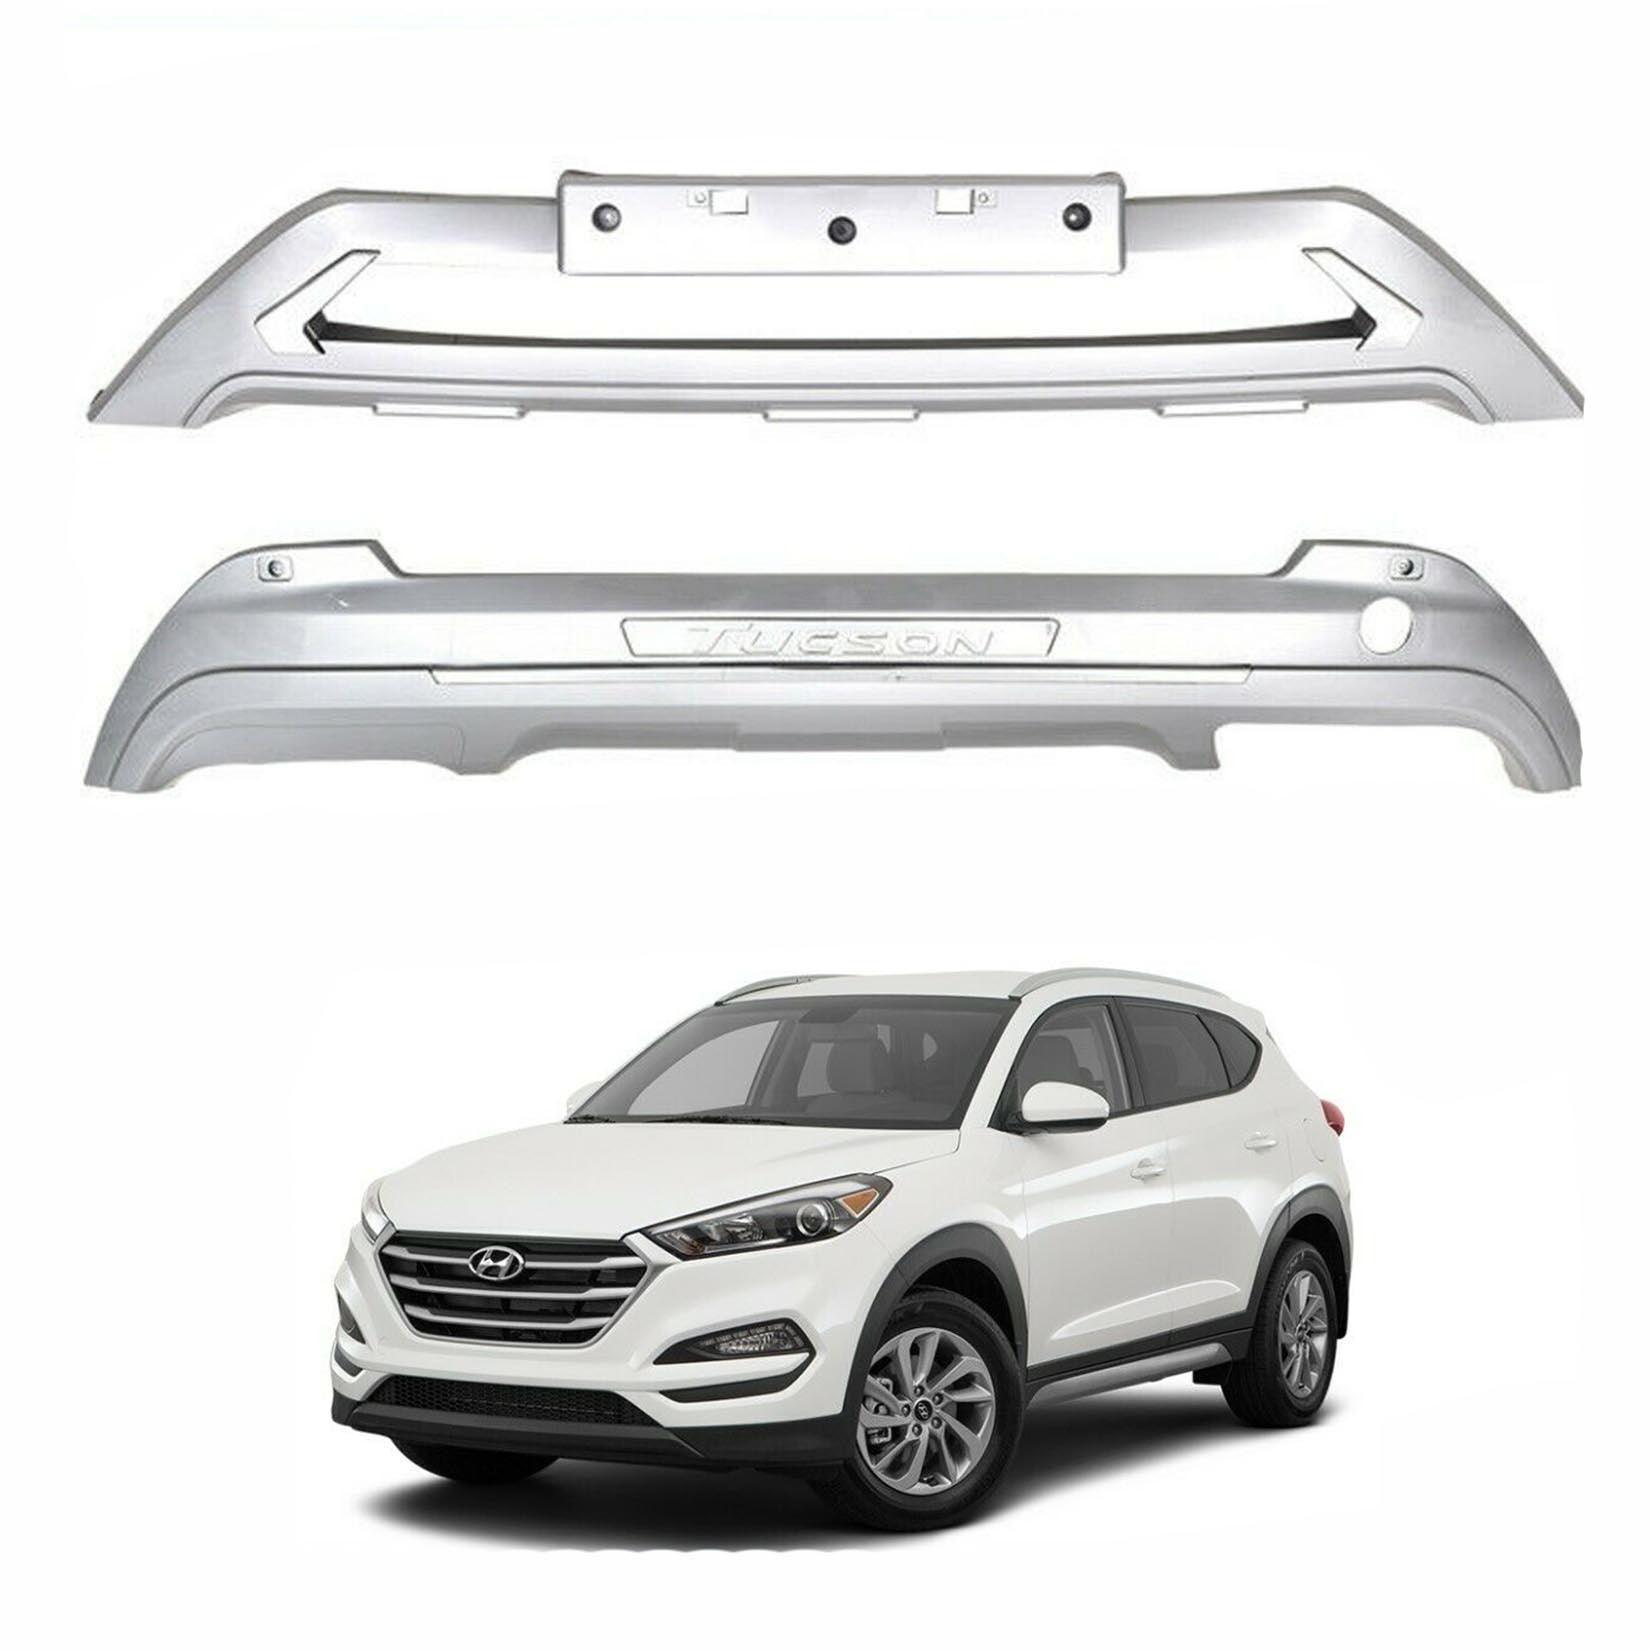 HYUNDAI TUCSON 2016 ON - STX FRONT AND REAR BUMPER PROTECTION - Storm Xccessories2